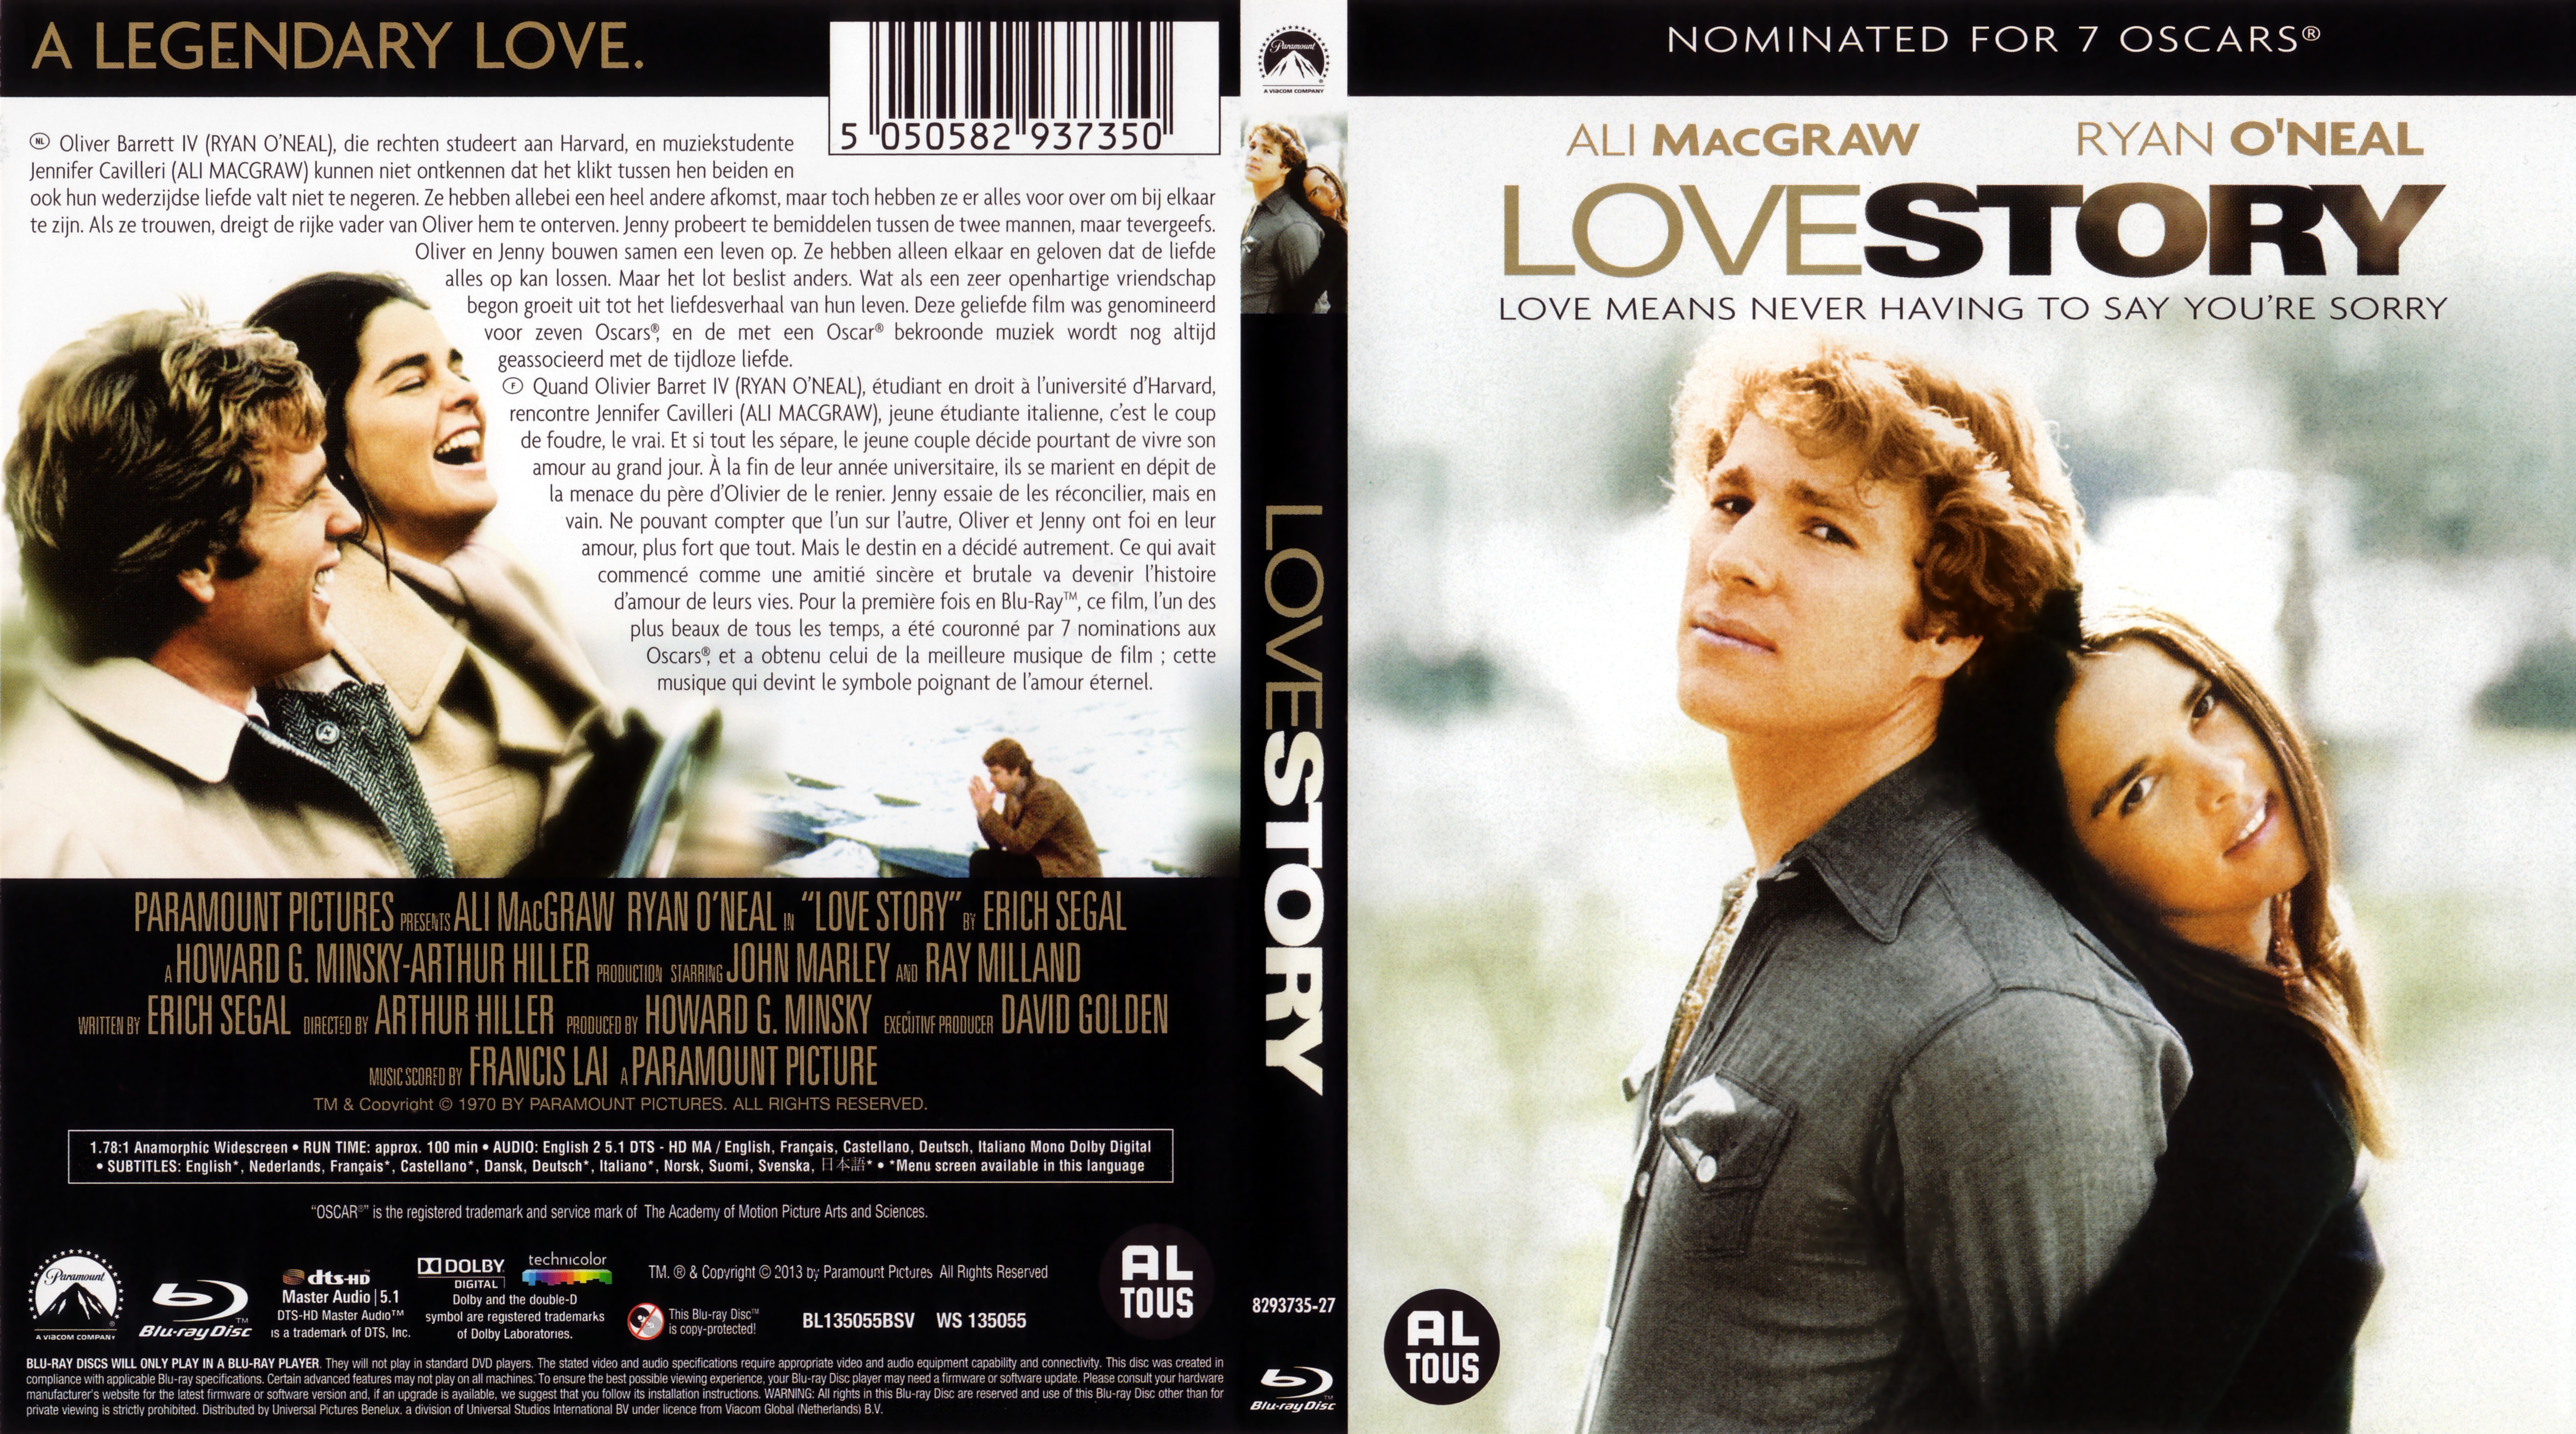 Jaquette DVD Love story (BLU-RAY) v2